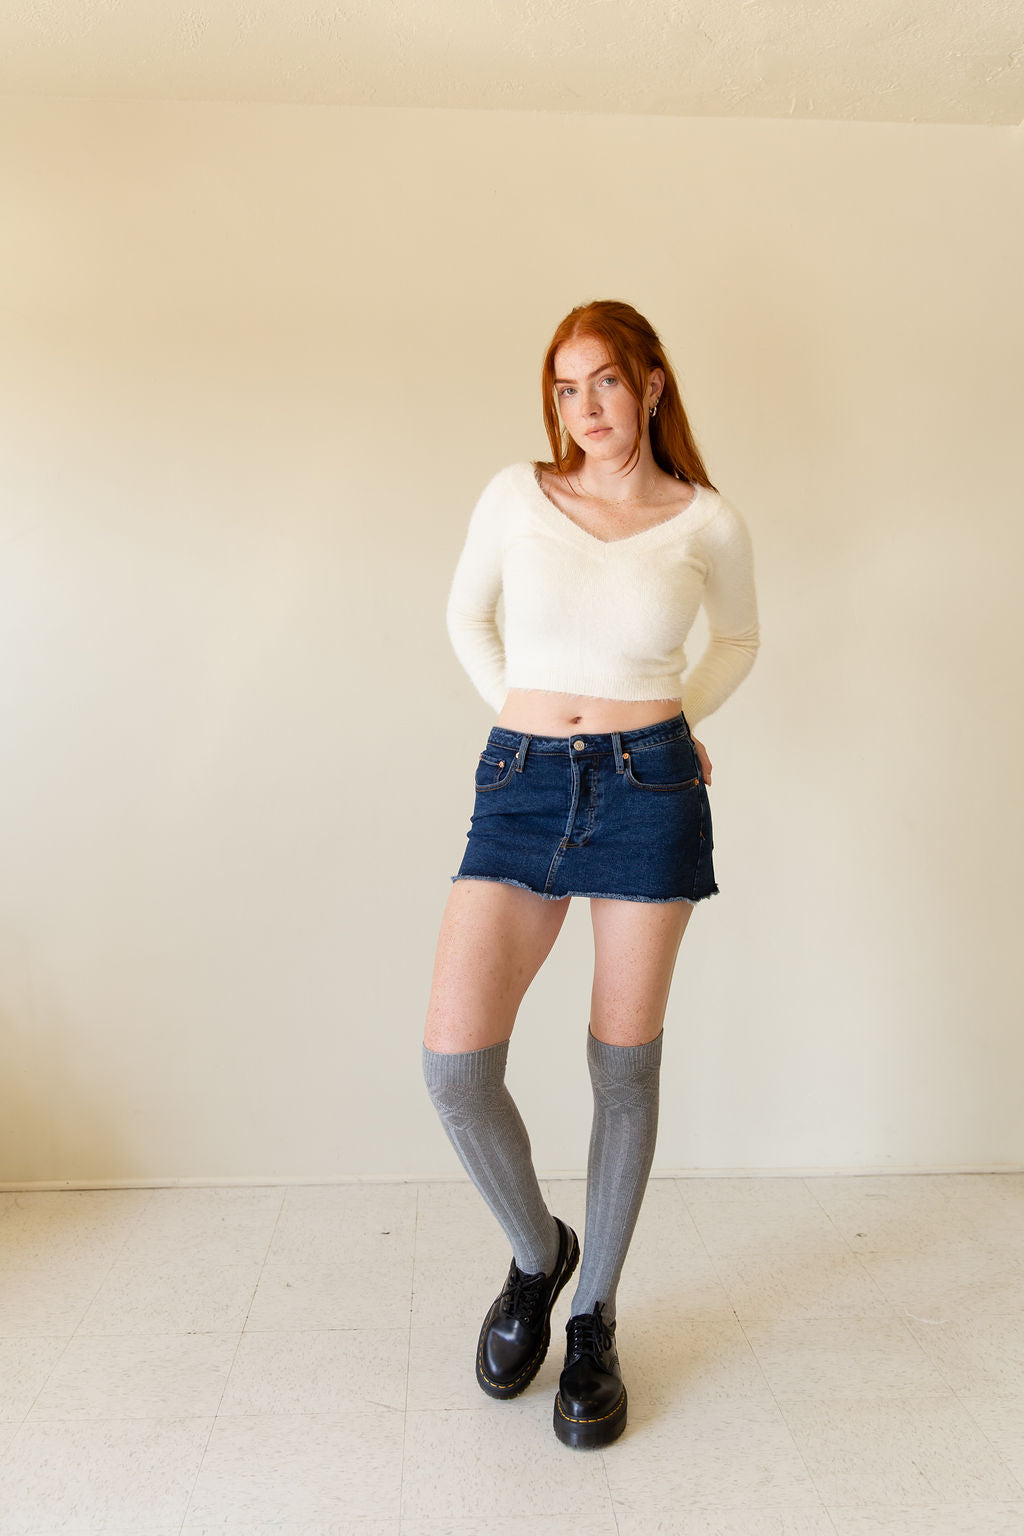 sophie moran | Can't wait for our denim mini skirts to arrive next week.  They are a bit longer in length than most mini's and have cargo style  pocke... | Instagram